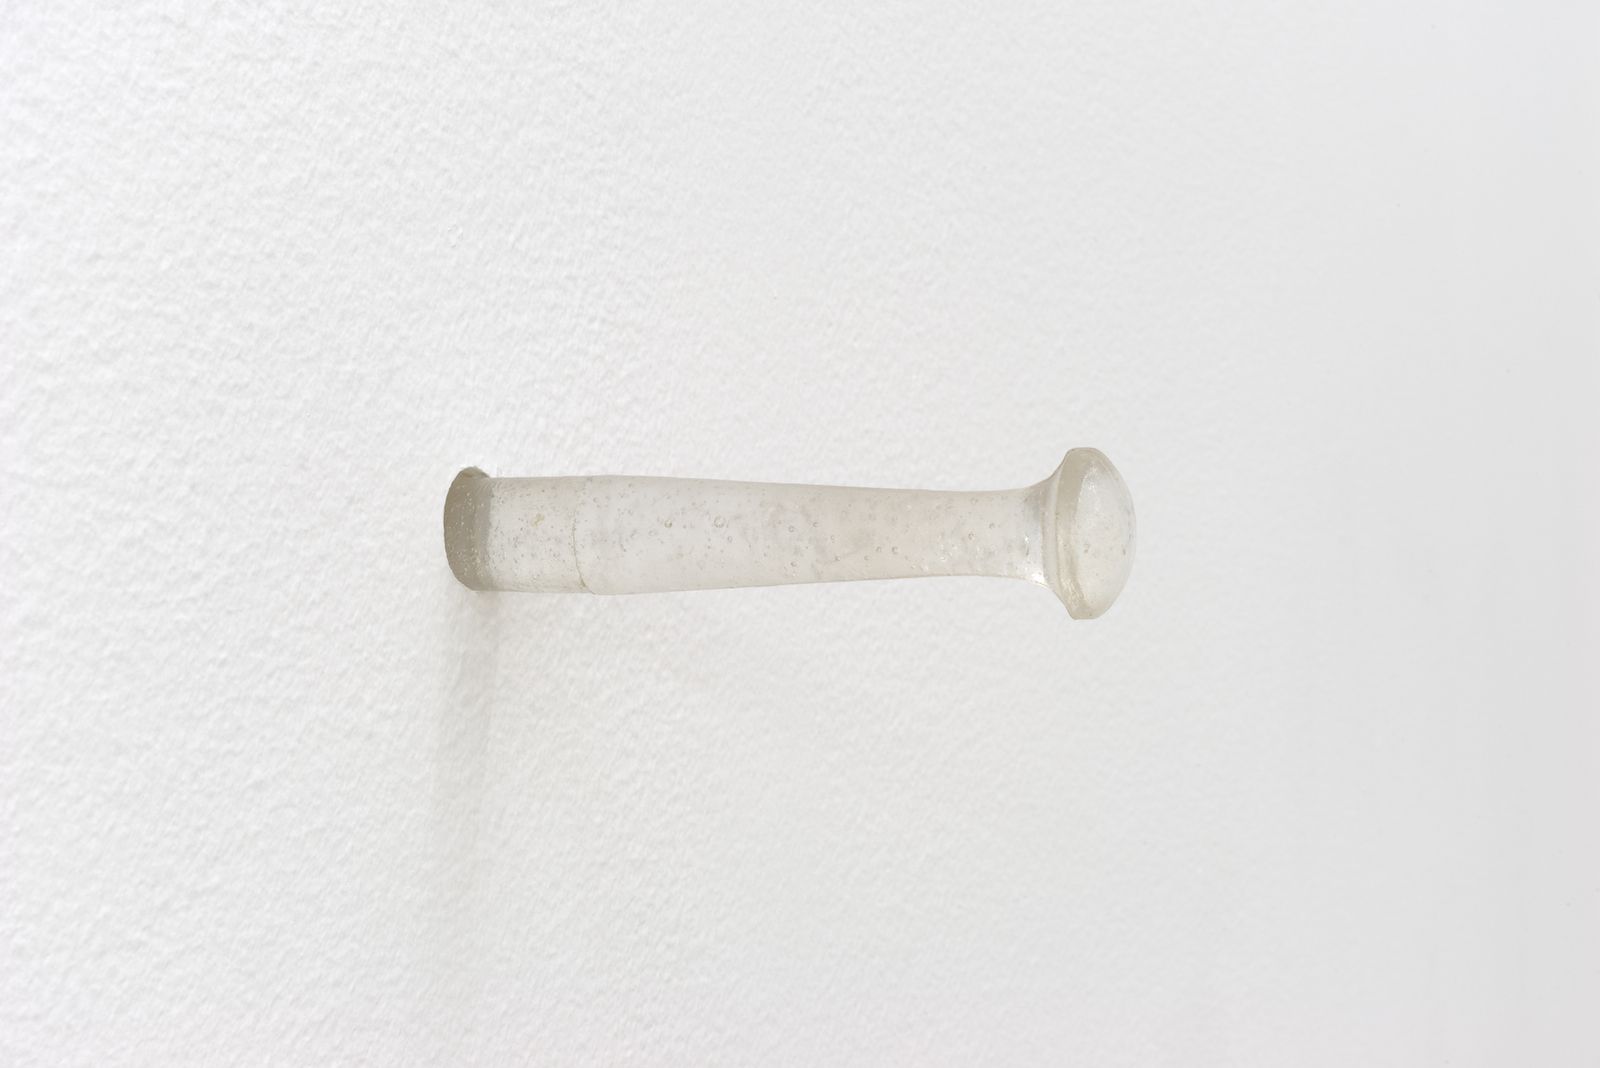 Gordon Hall, Double (II), 2014, shaker designed pegs cast in resin, set of two, 3⁄4 × 3⁄4 × 3 in.